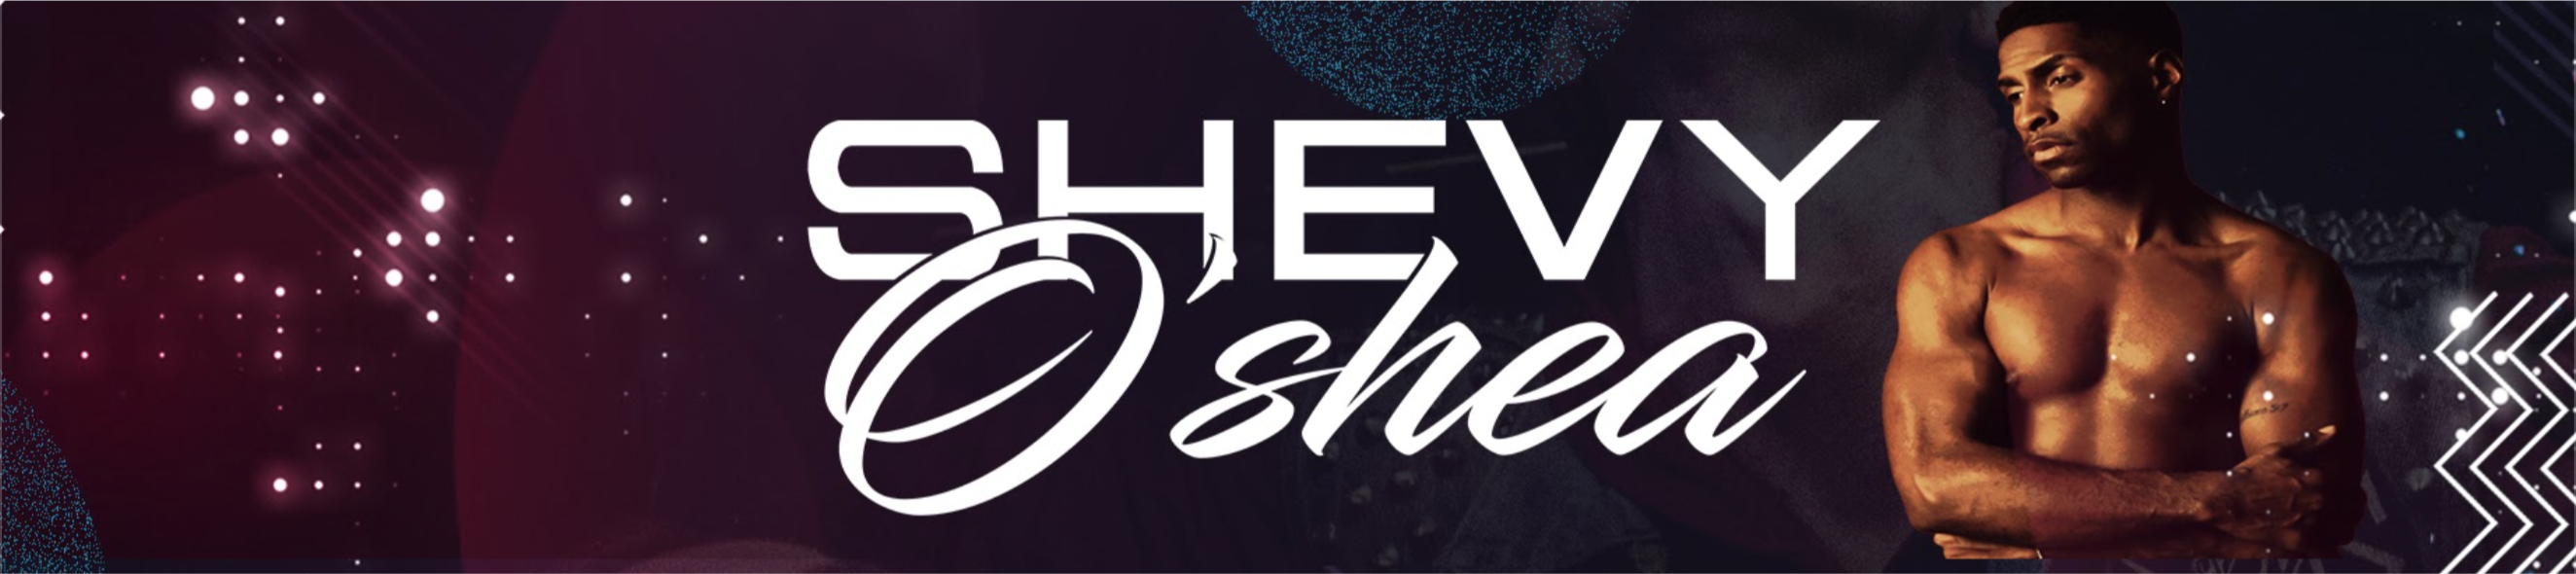 R&B-Pop artist Shevy O’Shea made an immediate impression with his early works, which established him as a performer unafraid to make a personal statement with his music